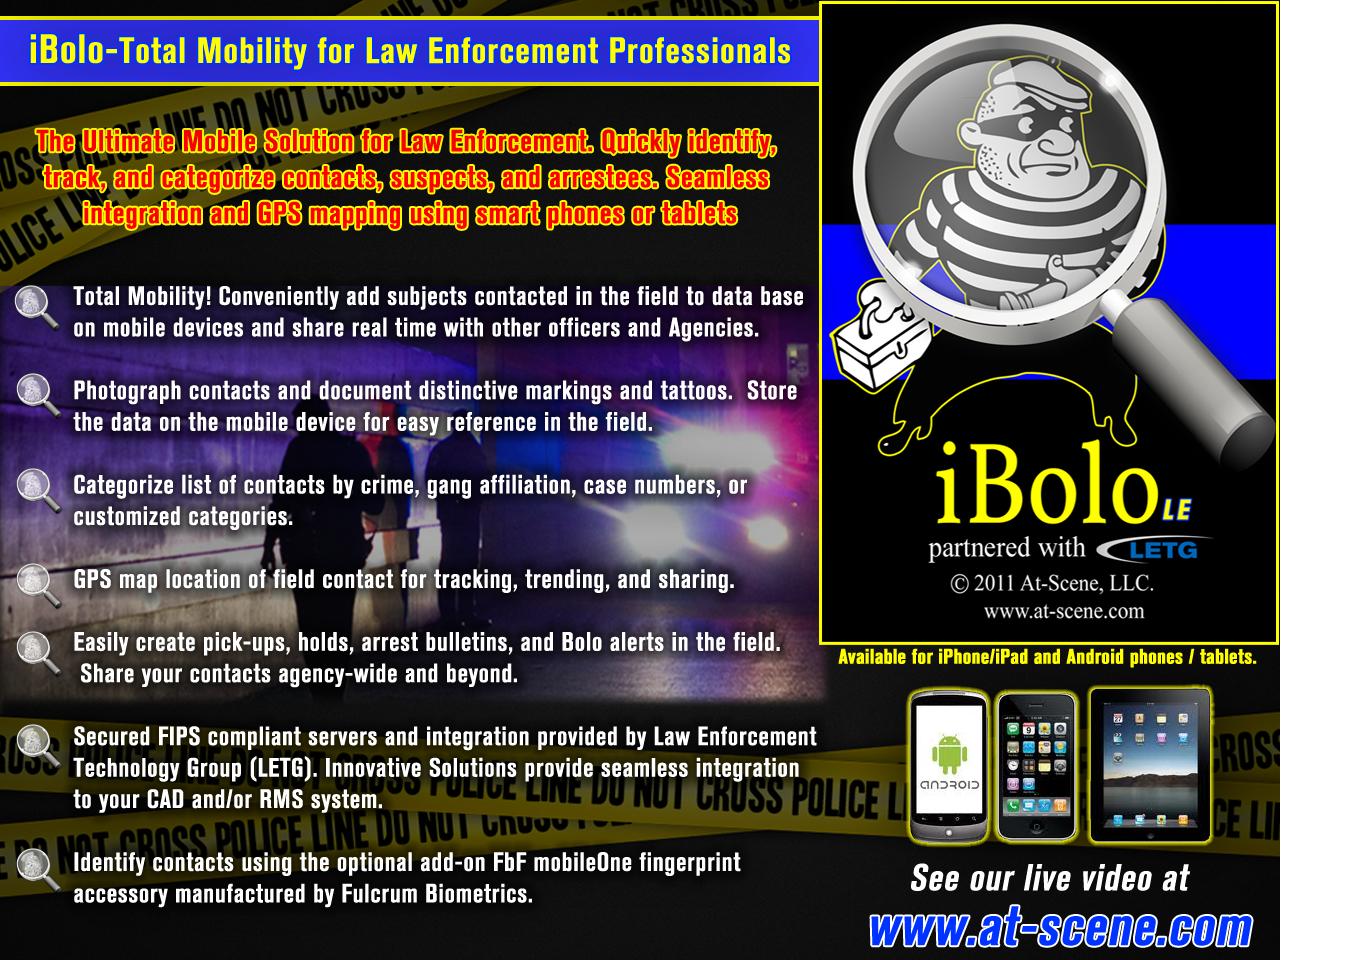 iBolo by At-Scene, LLC